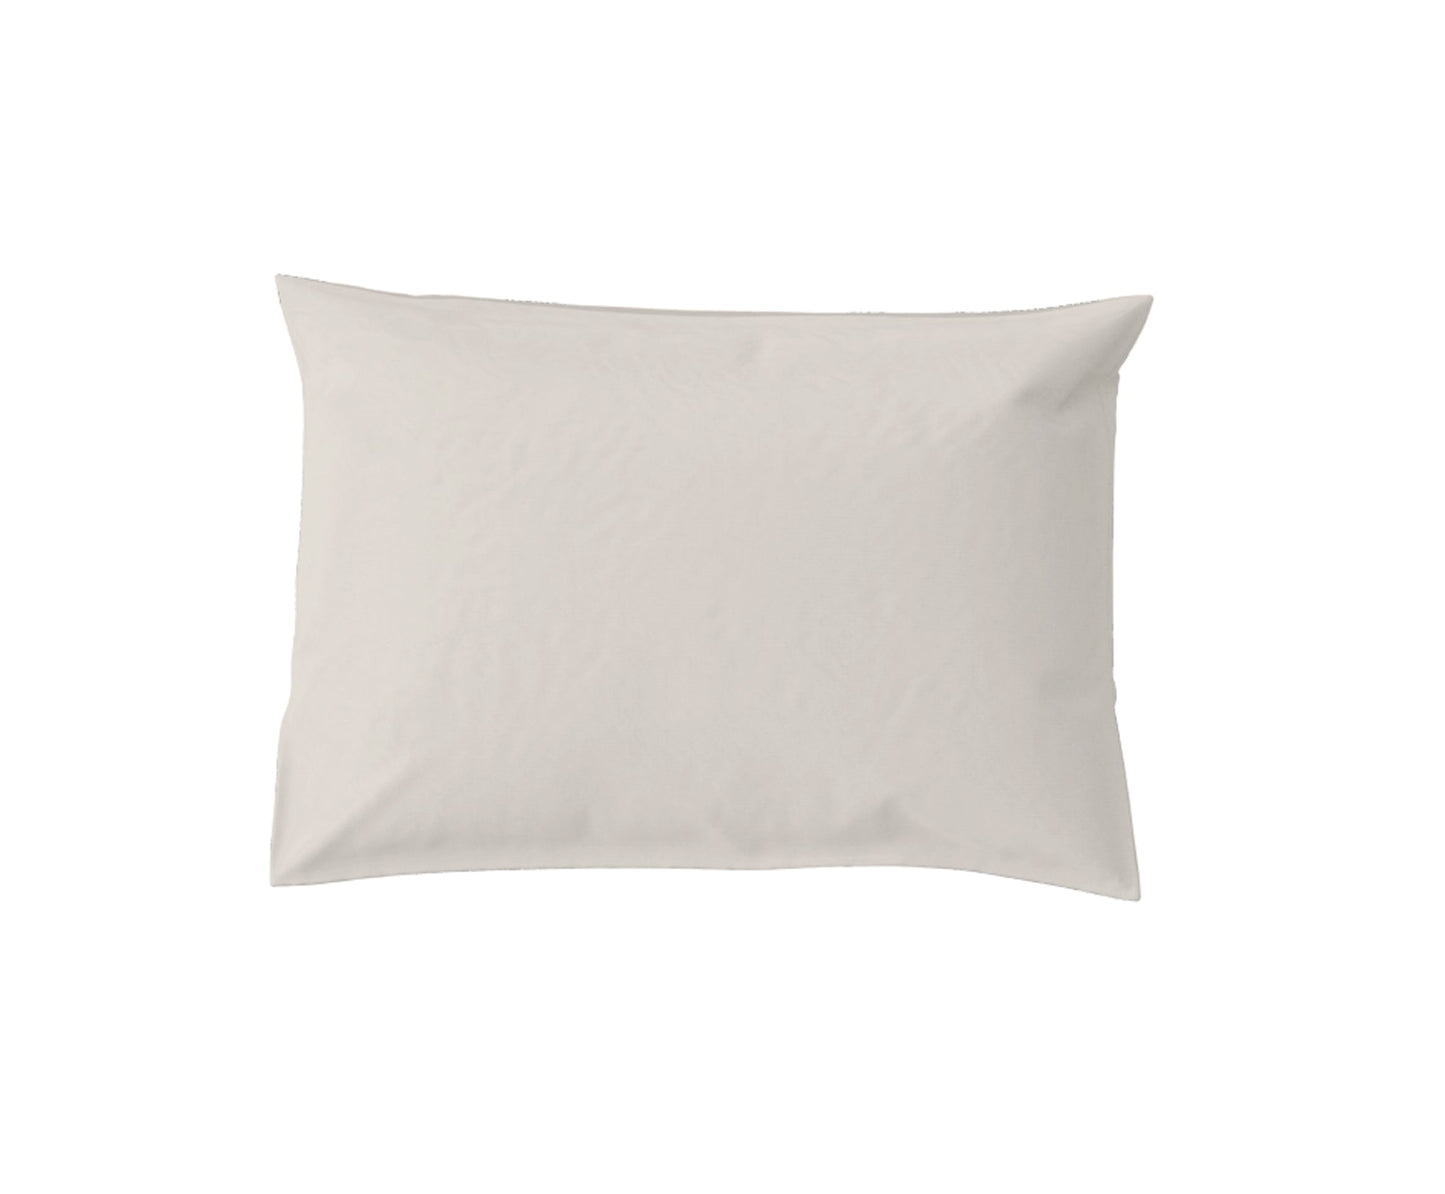 Smooth Beige Satin Pillowcase Bed 105